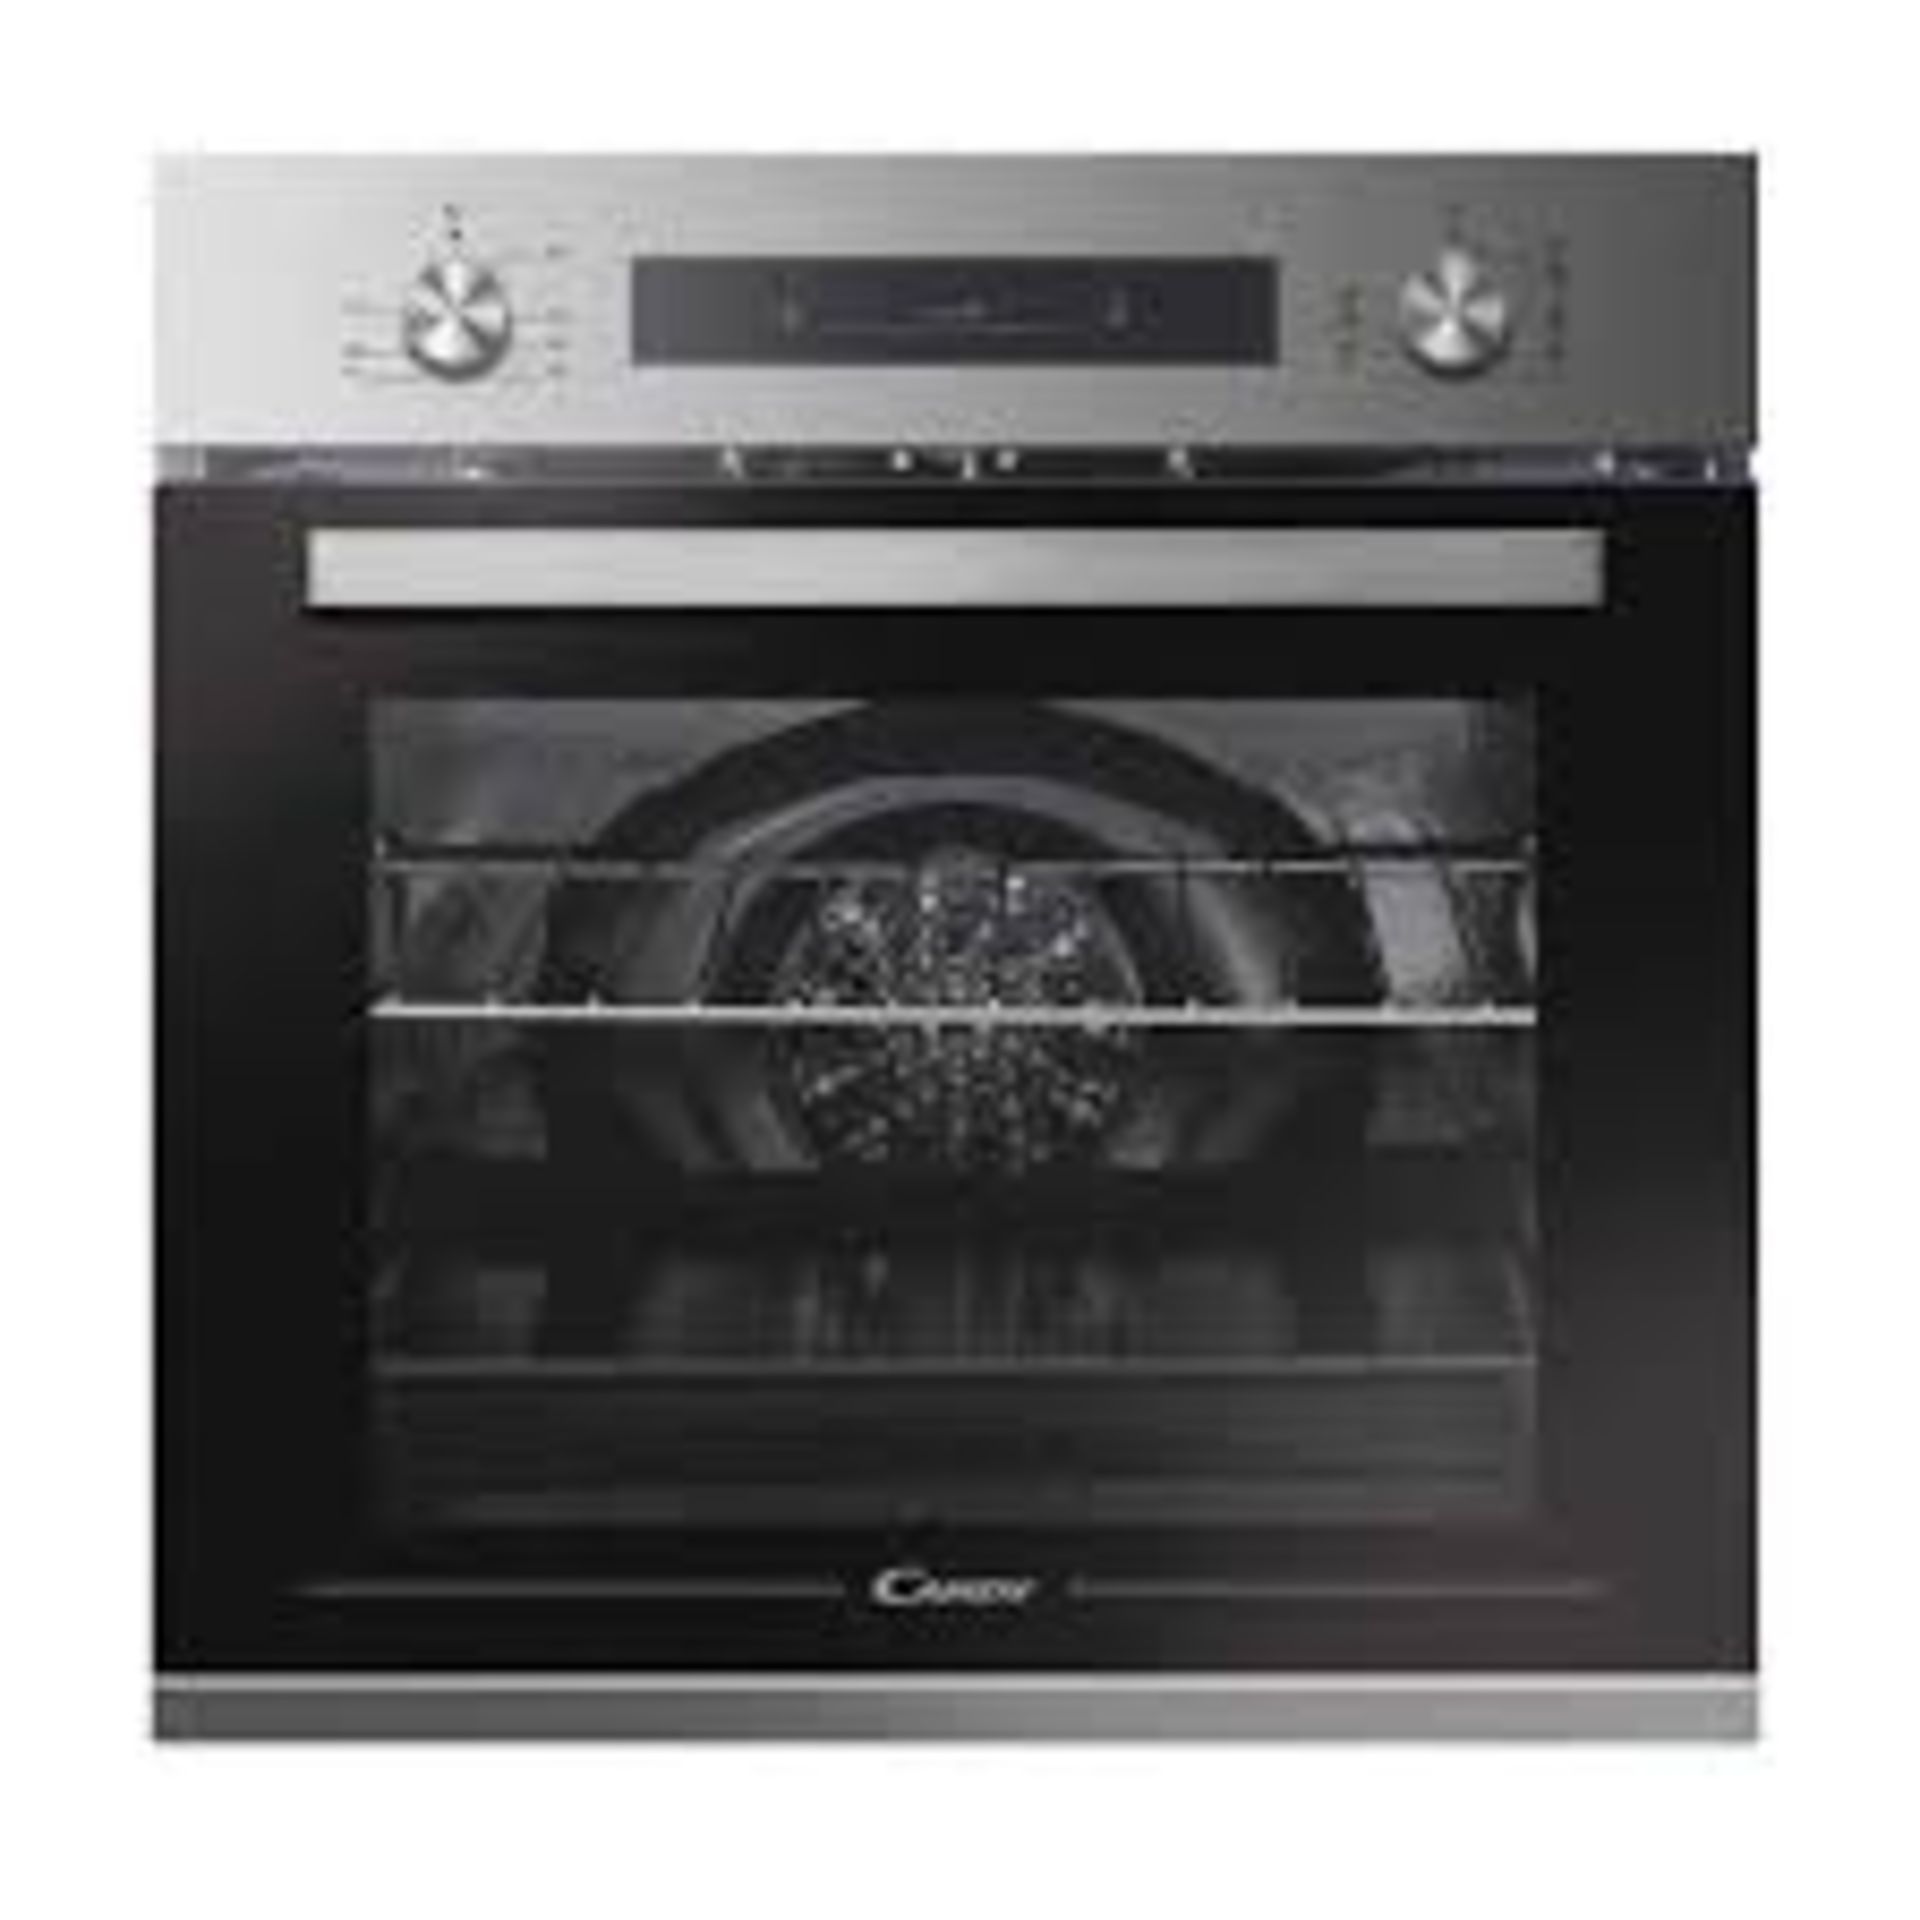 Candy FCP602X E0/E Built-in Single Oven - Black. - ER44. This 60cm multifunction oven has a touch